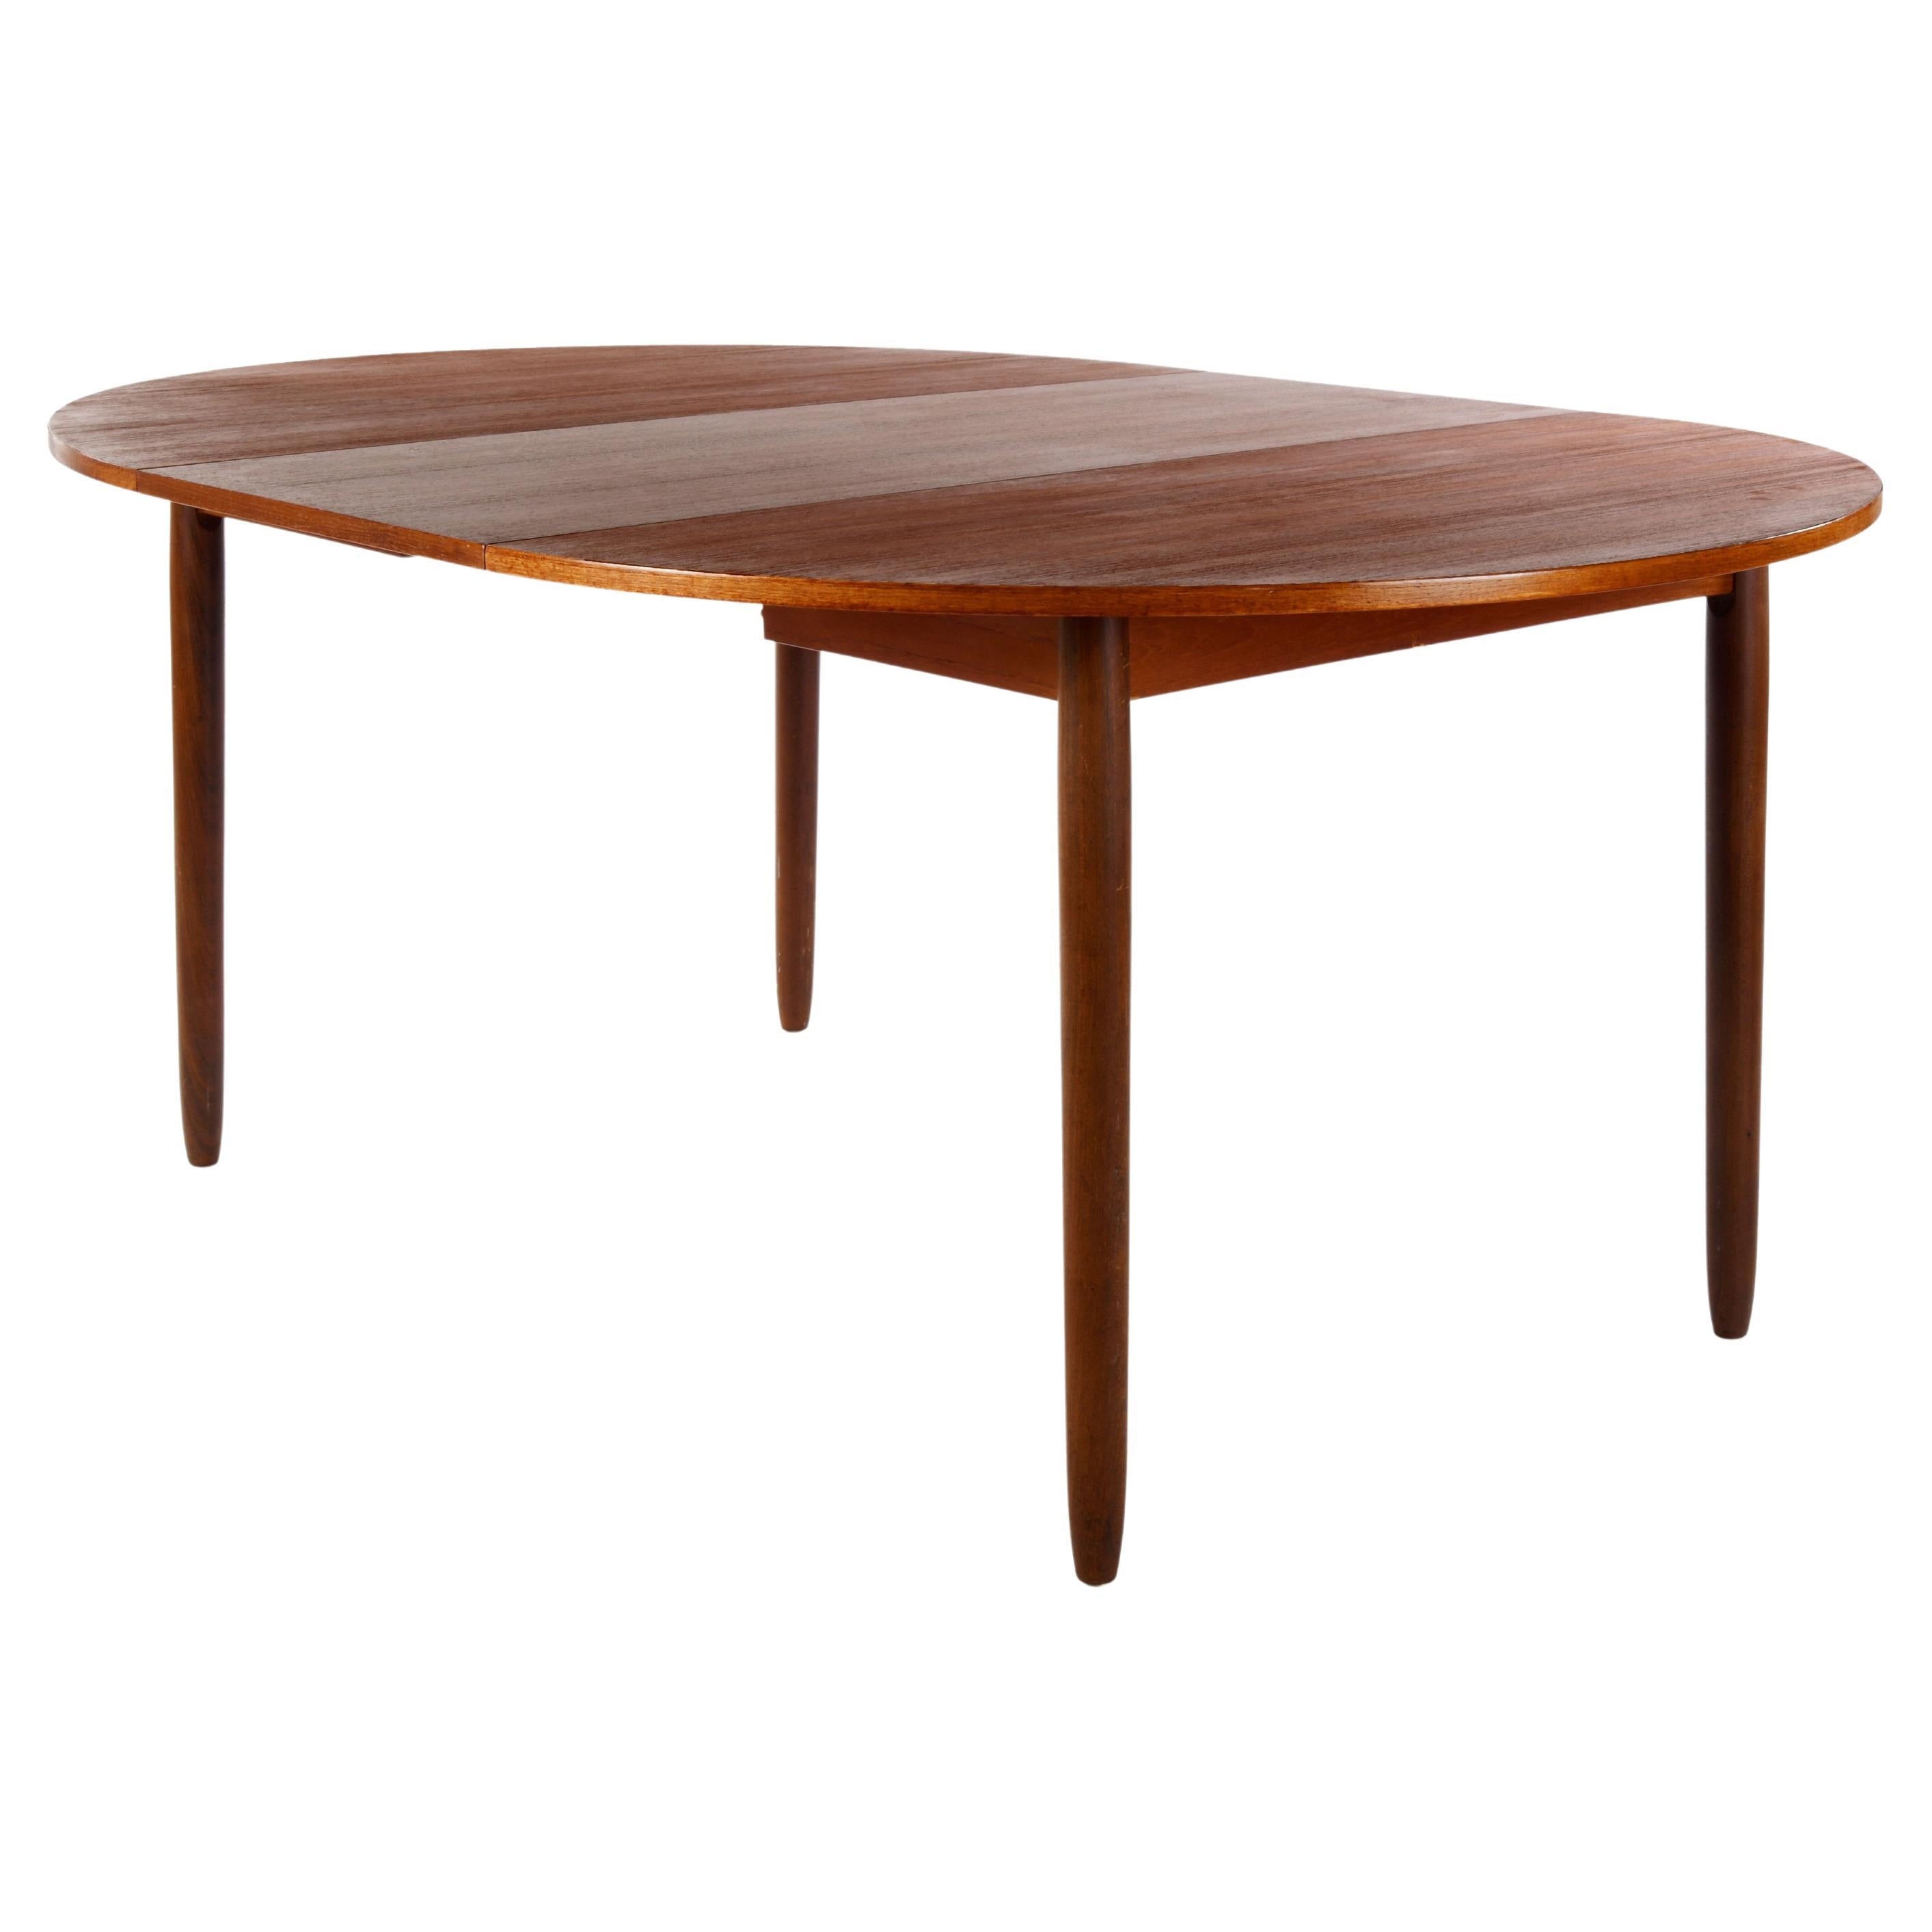 Scandinavian vintage teak extensible table, round and oval